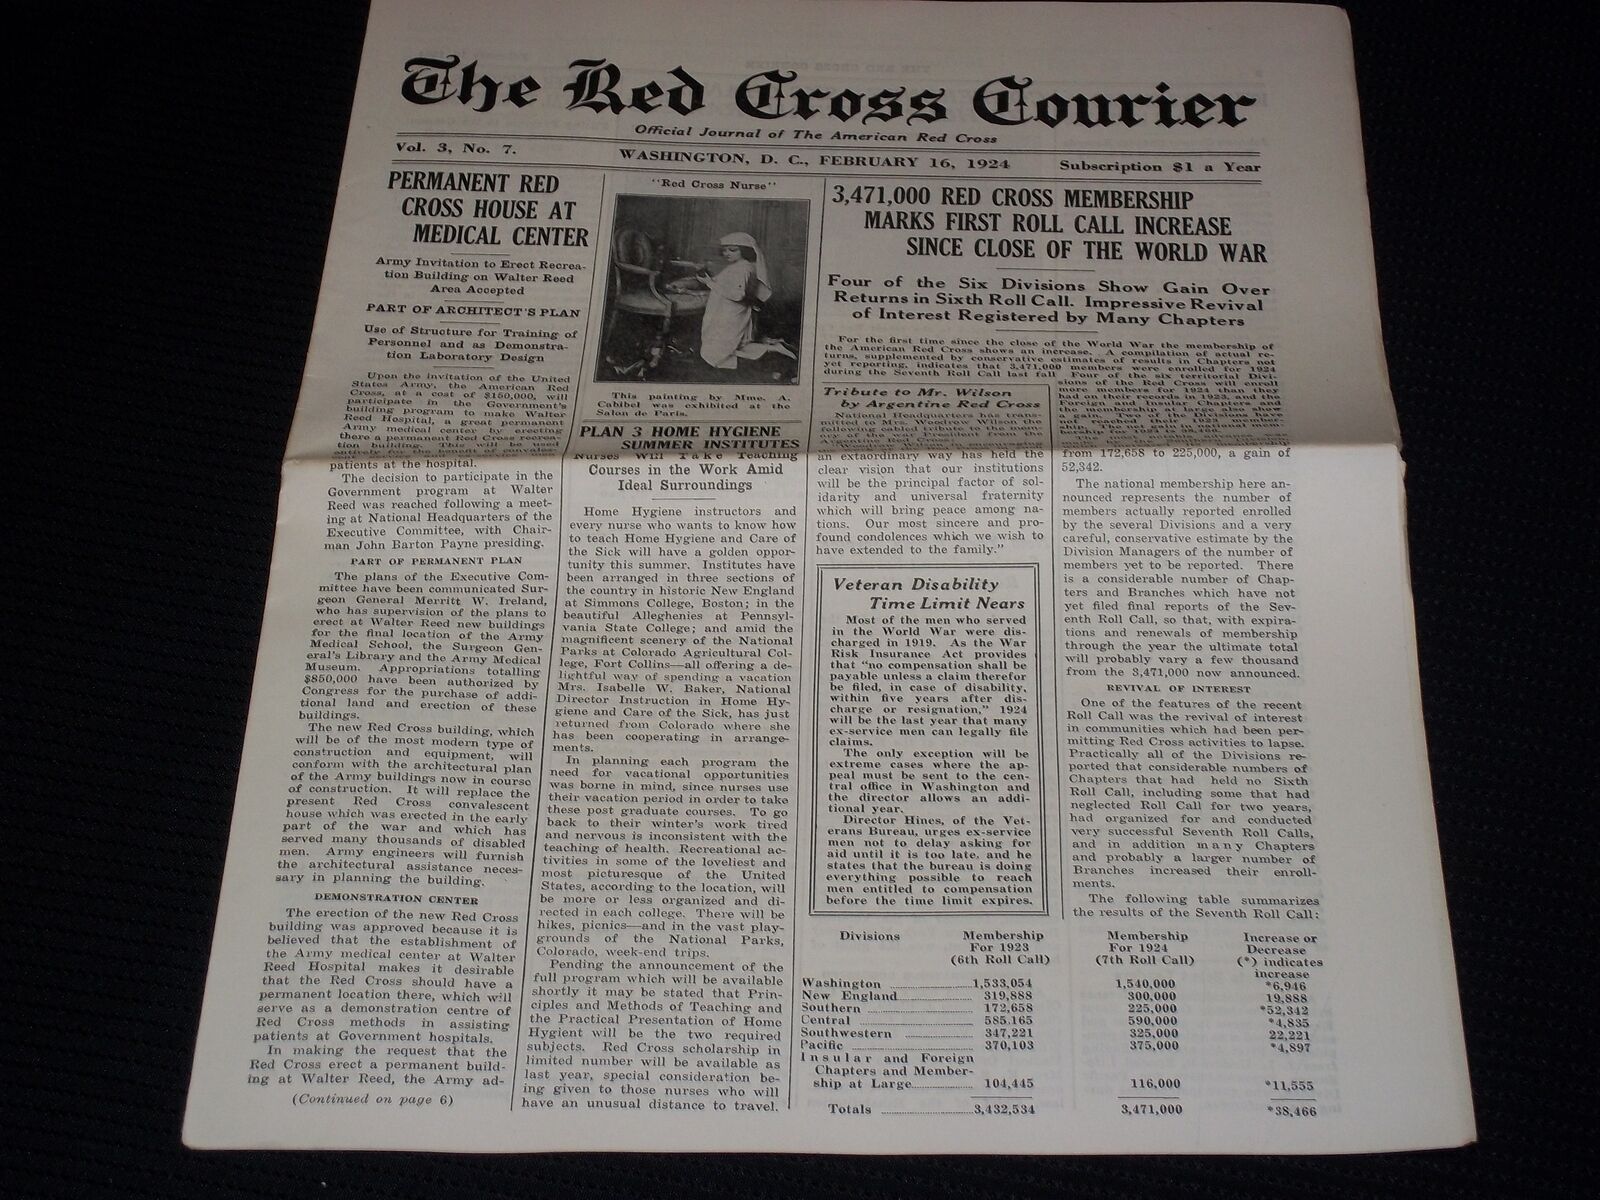 1924 FEBRUARY 16 THE RED CROSS COURIER MAGAZINE NICE BIRTHDAY PRESENT - 0 18141